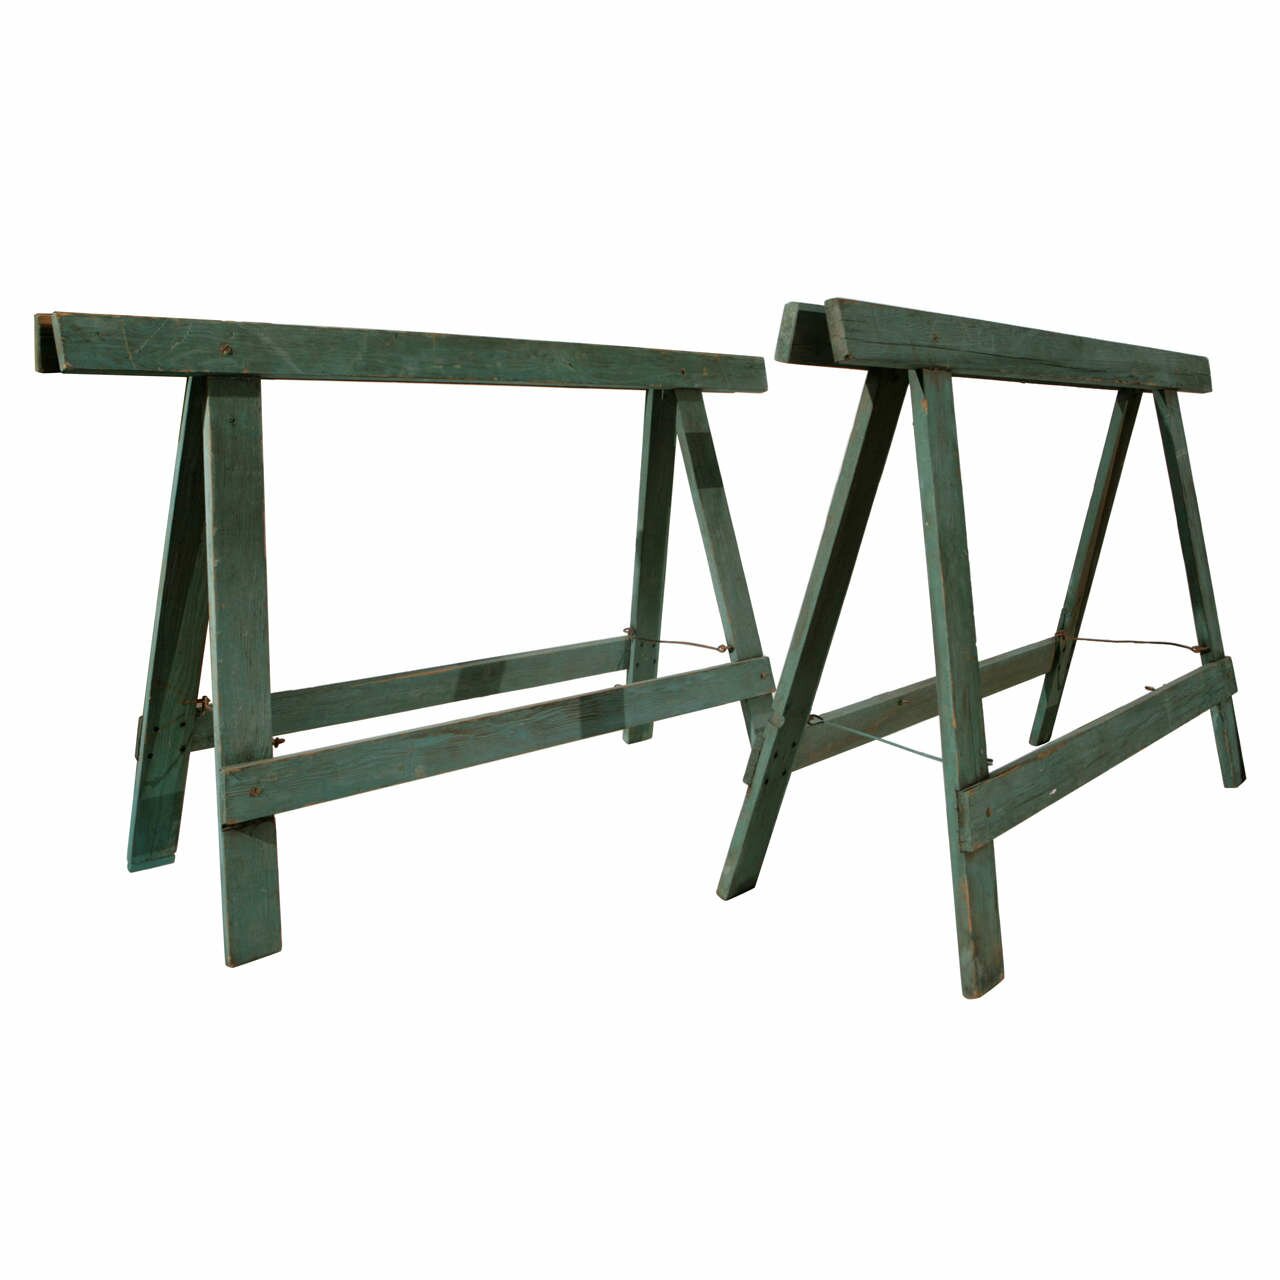 Work Bench Legs for Best Your Workspace Furniture Design: Work Bench Legs | Workbench Supports | Workbench Legs With Casters